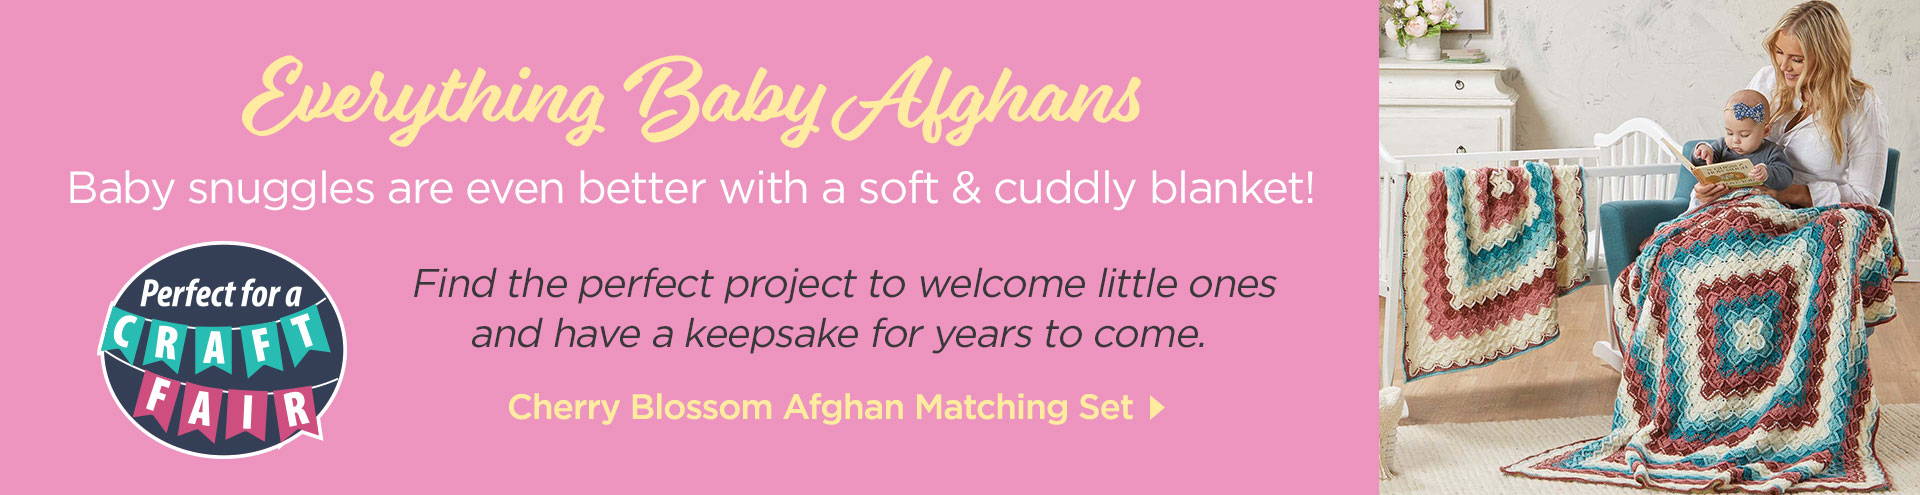 Baby snuggles are even better with a soft and cuddly blanket! Find the perfect project to welcome little ones and have a keepsake for years to come. 